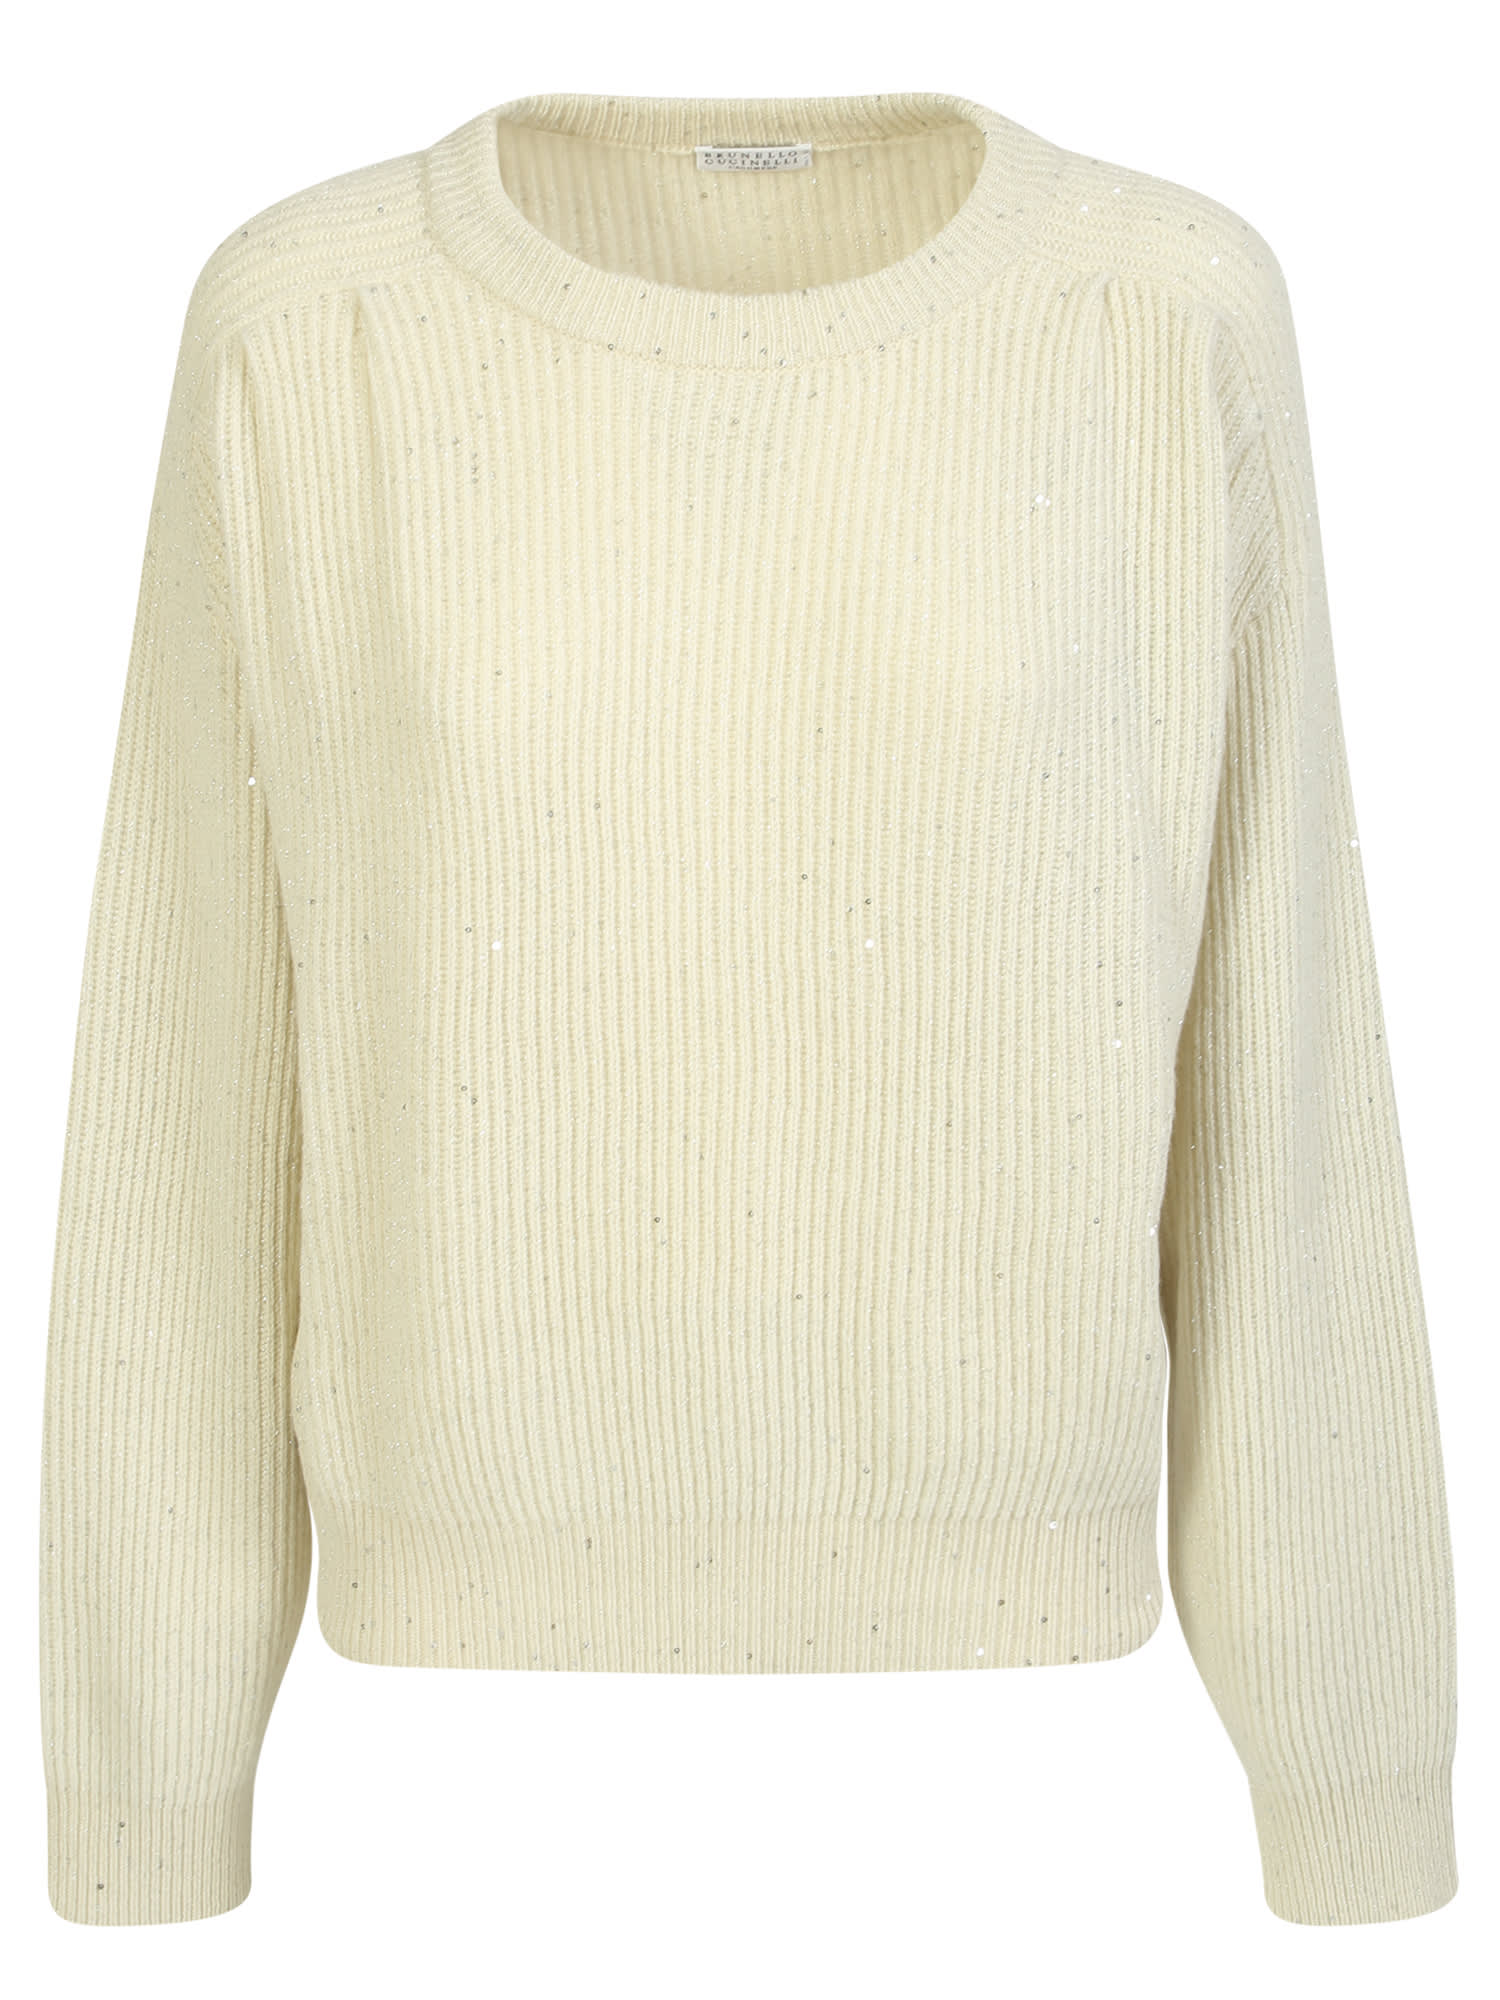 Made From A Cashmere Blend, The Sequins On This Brunello Cucinelli Sweater Add A Touch Of Shine